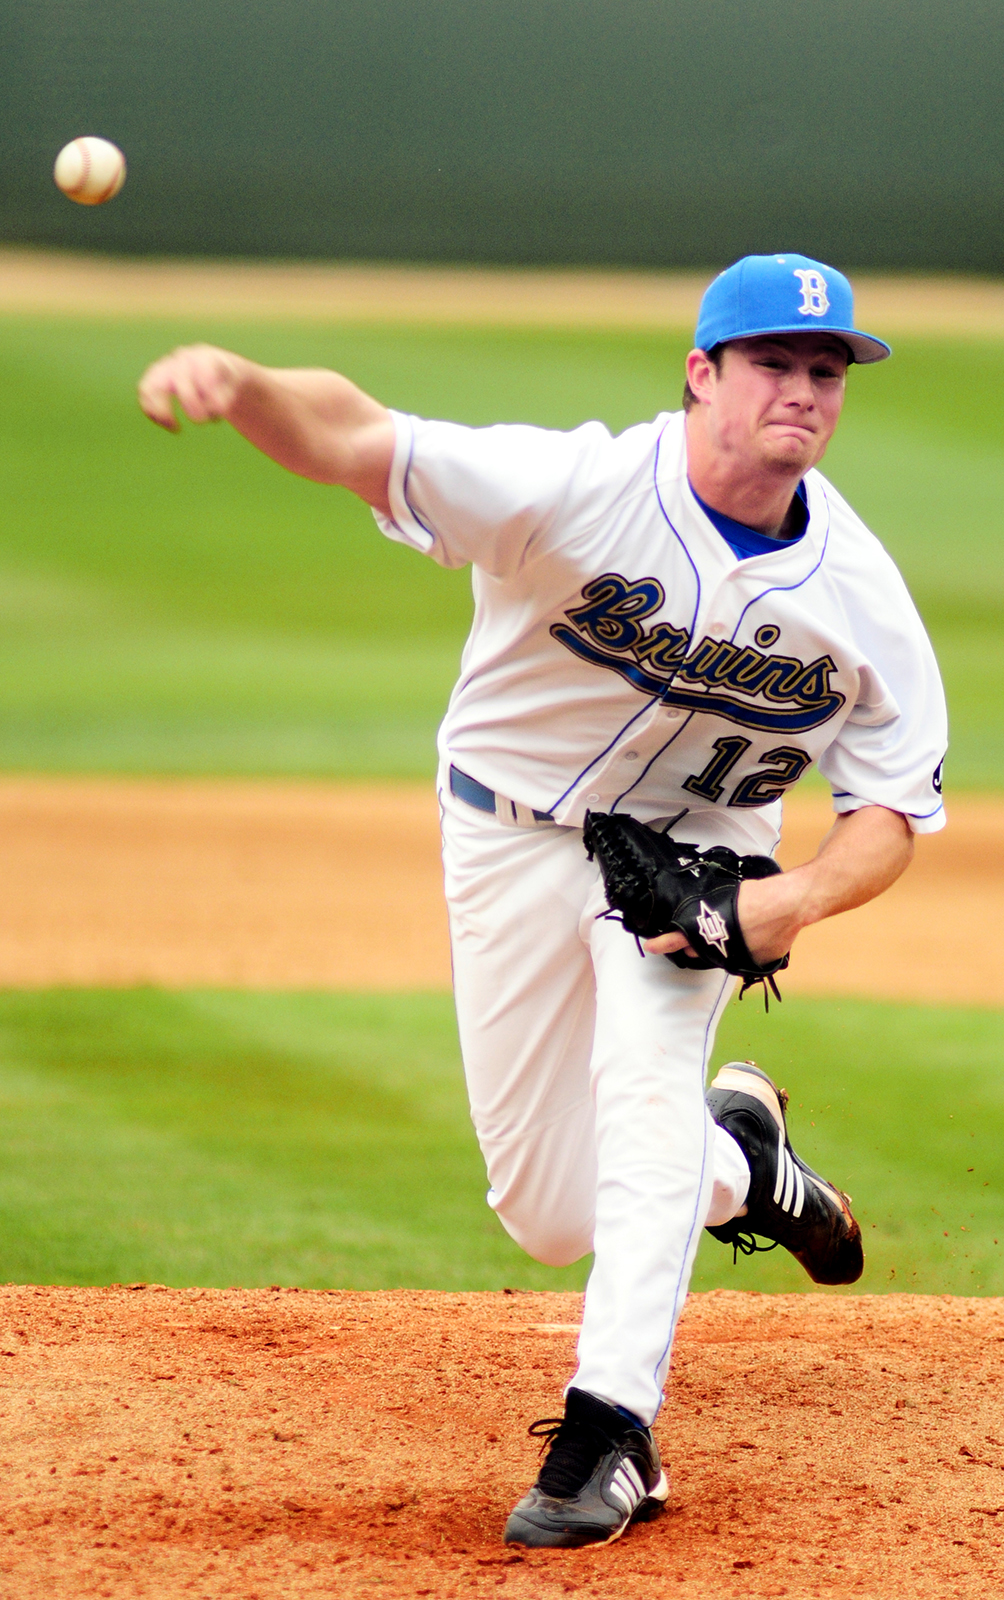 Why Did Gerrit Cole Turn Down Millions For UCLA? - Bruins Nation